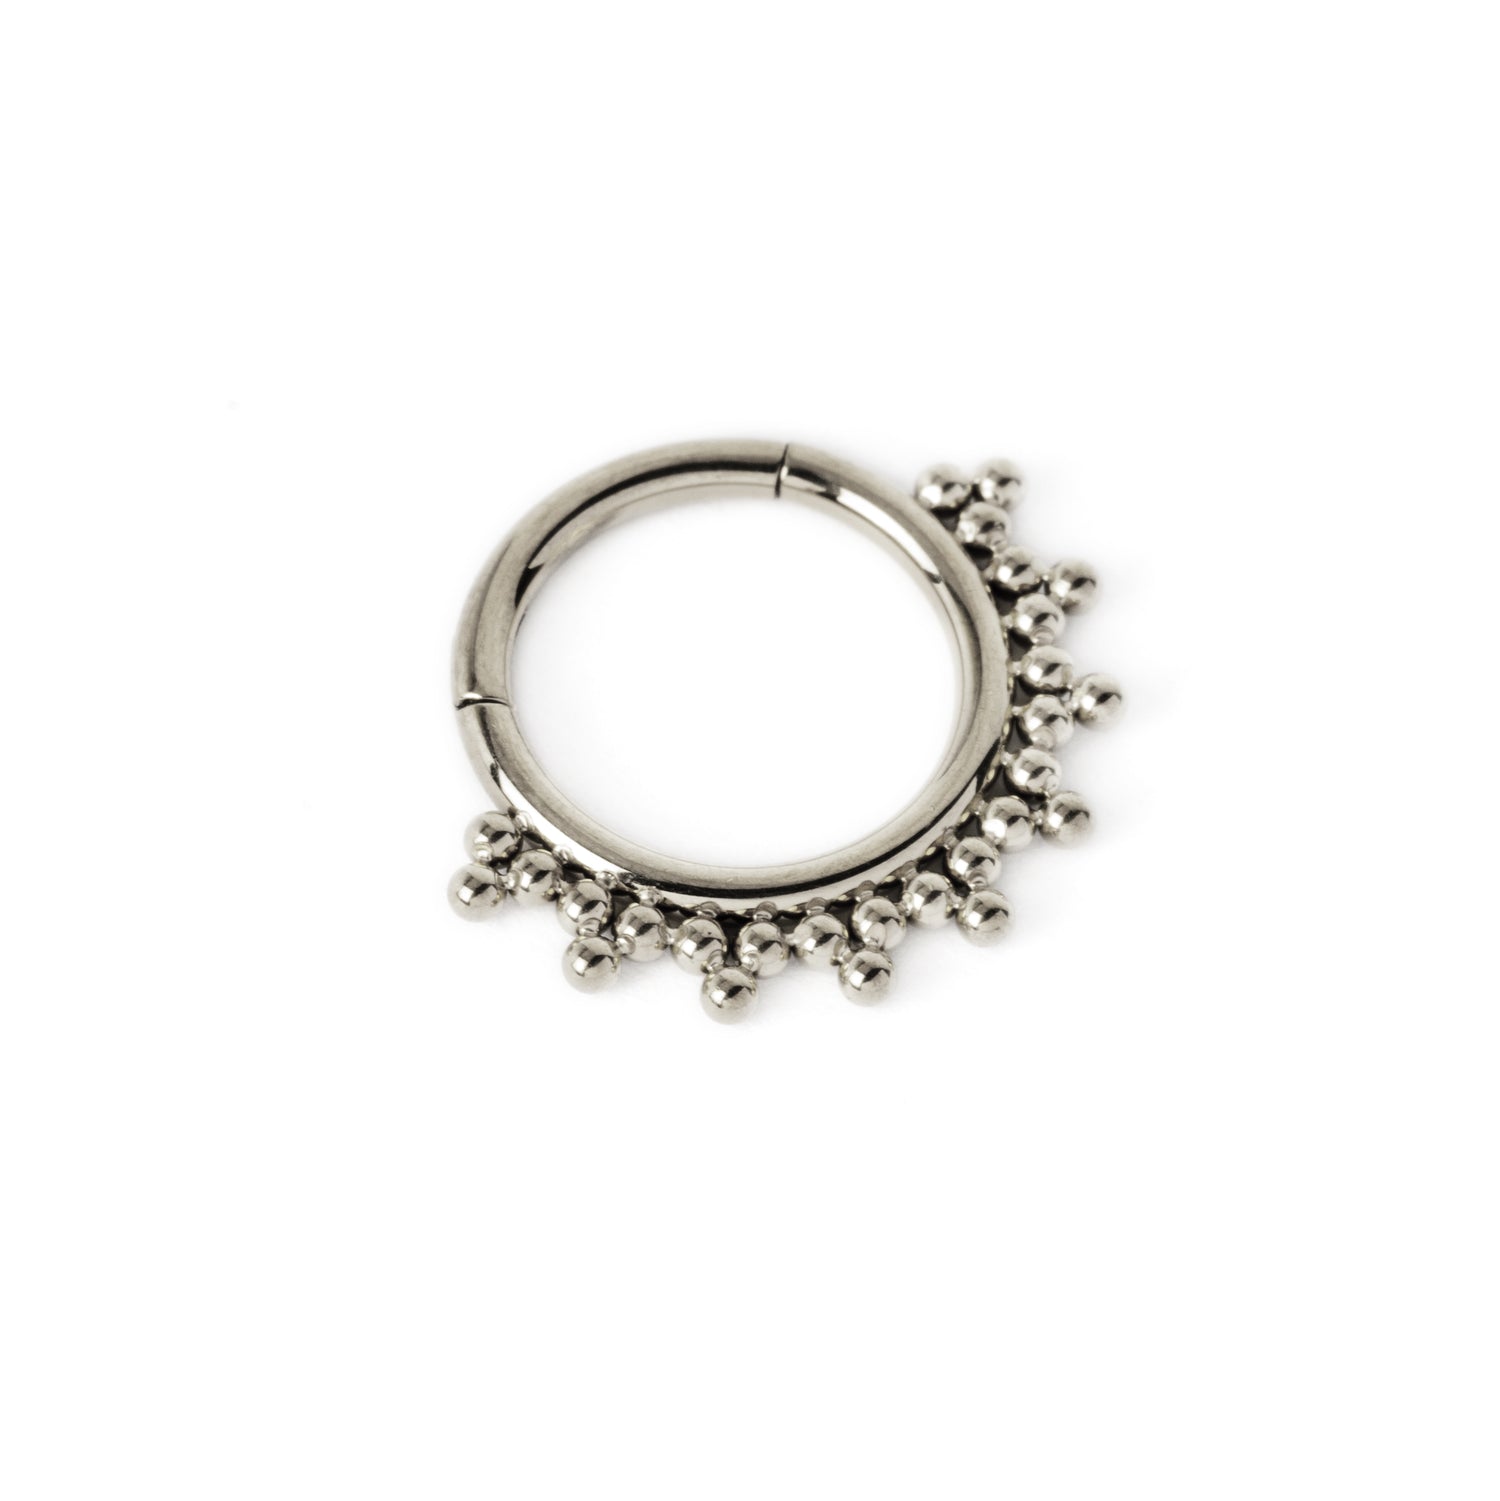 Sarika surgical steel septum clicker right side view